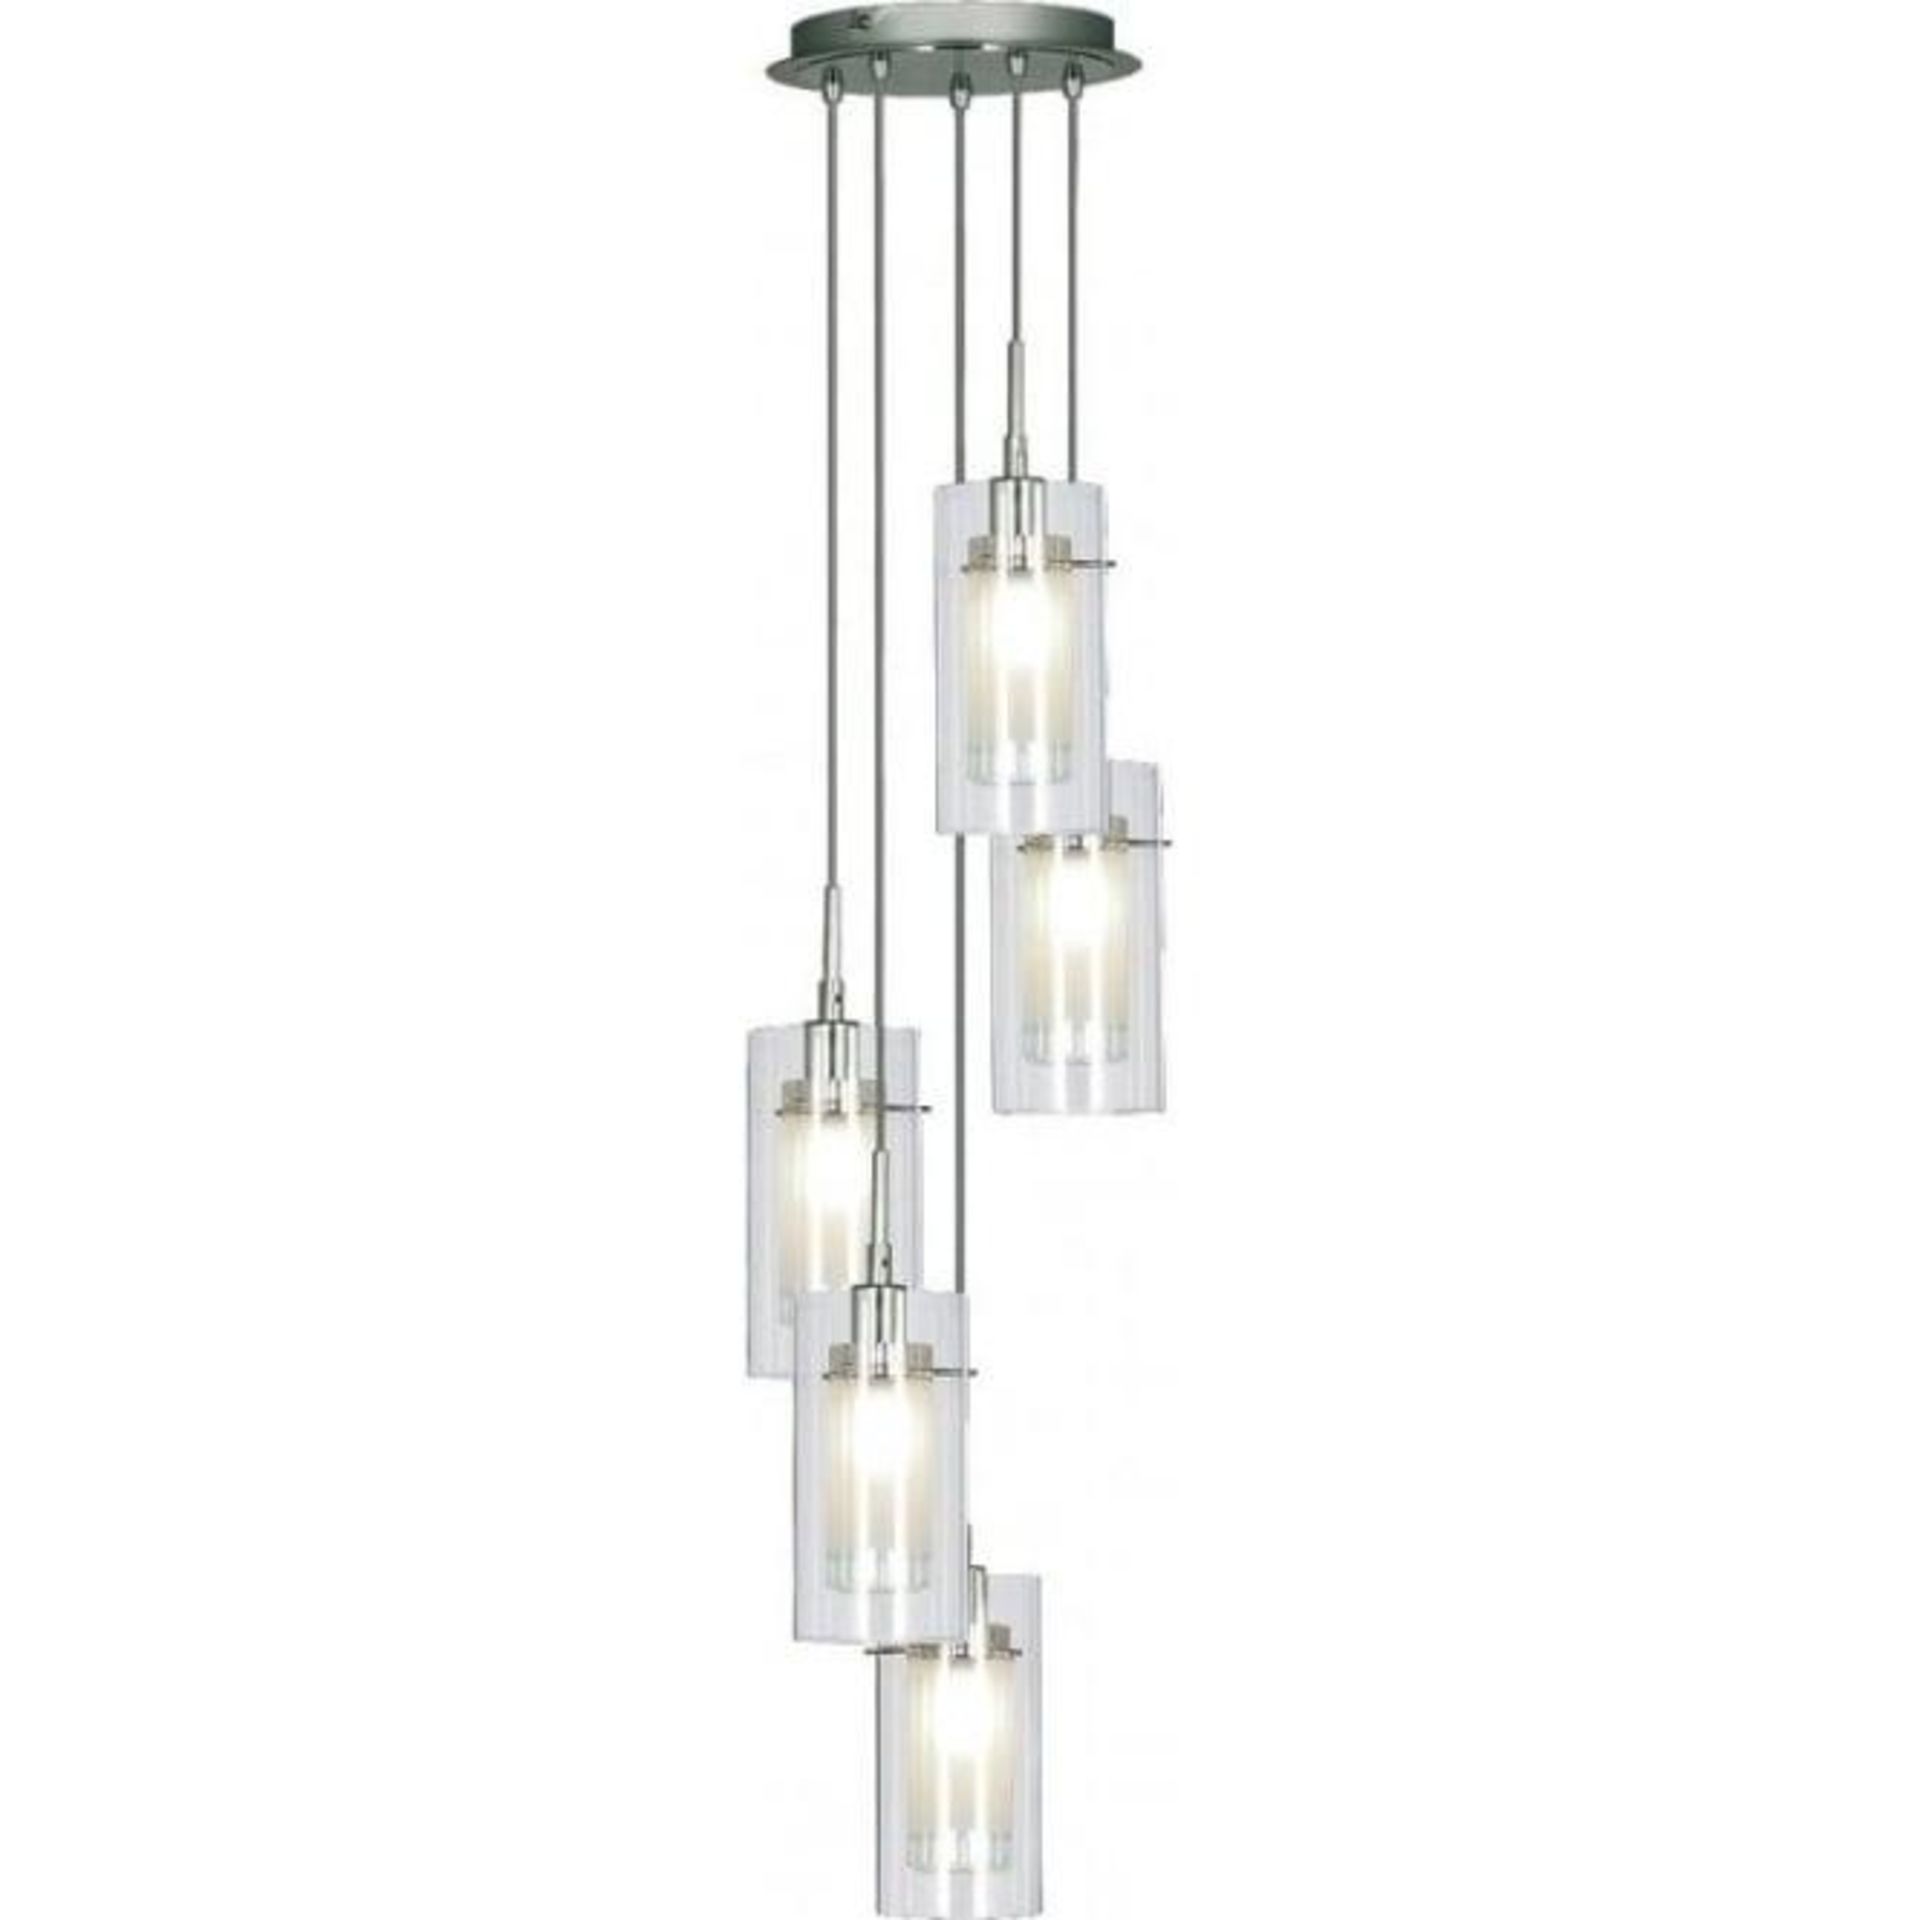 1 x Duo 1 5 Light Ceiling Pendant Polished Chrome - New Boxed Stock - CL364 - Ref: ERP1- 2305-5 - Lo